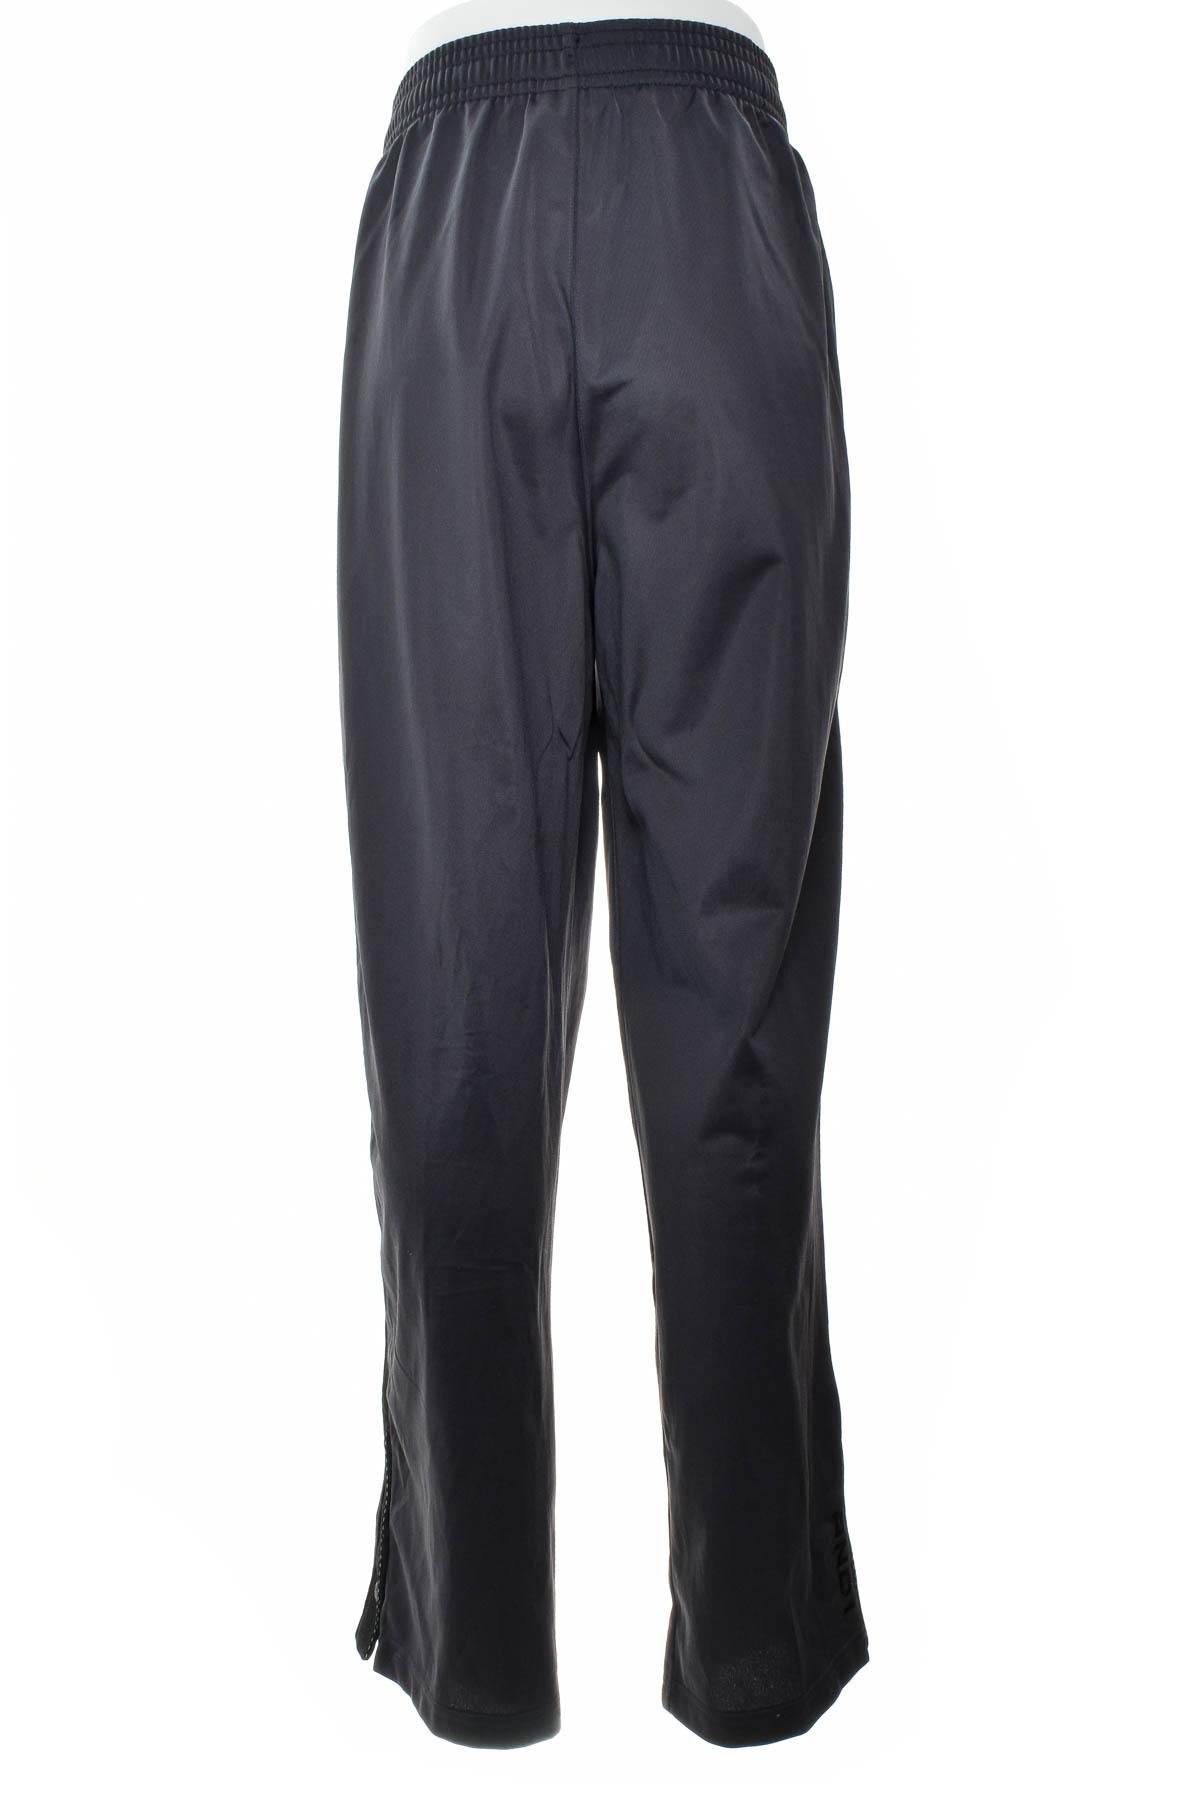 Men's trousers - AND 1 - 1